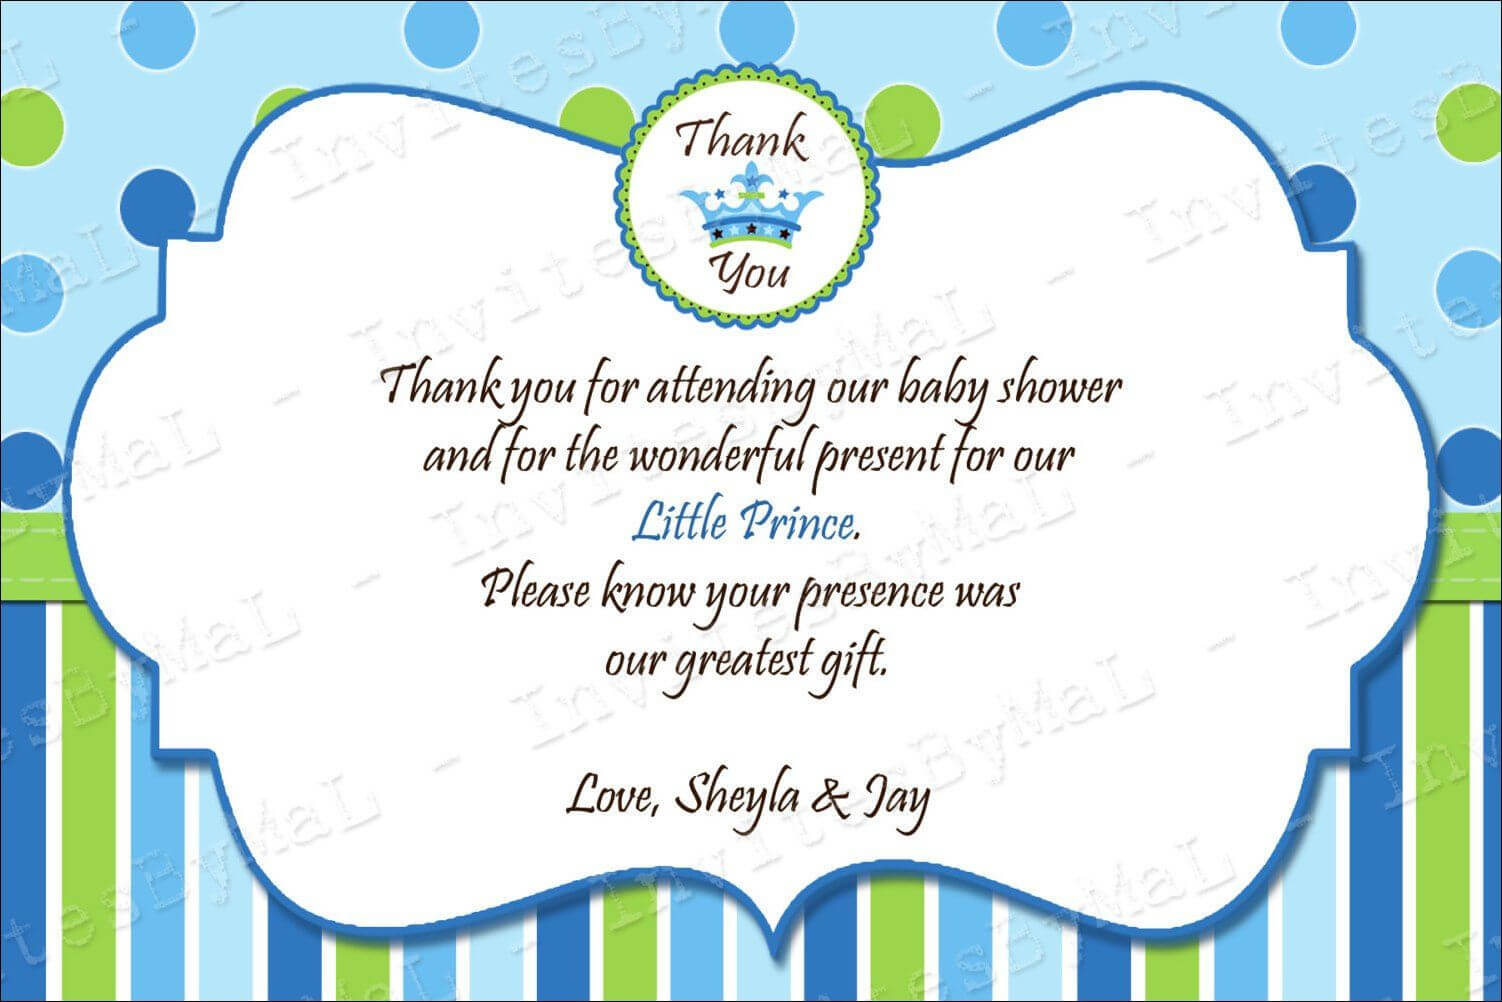 40 Beautiful Baby Shower Thank You Cards Ideas | Baby Shower Inside Thank You Card Template For Baby Shower